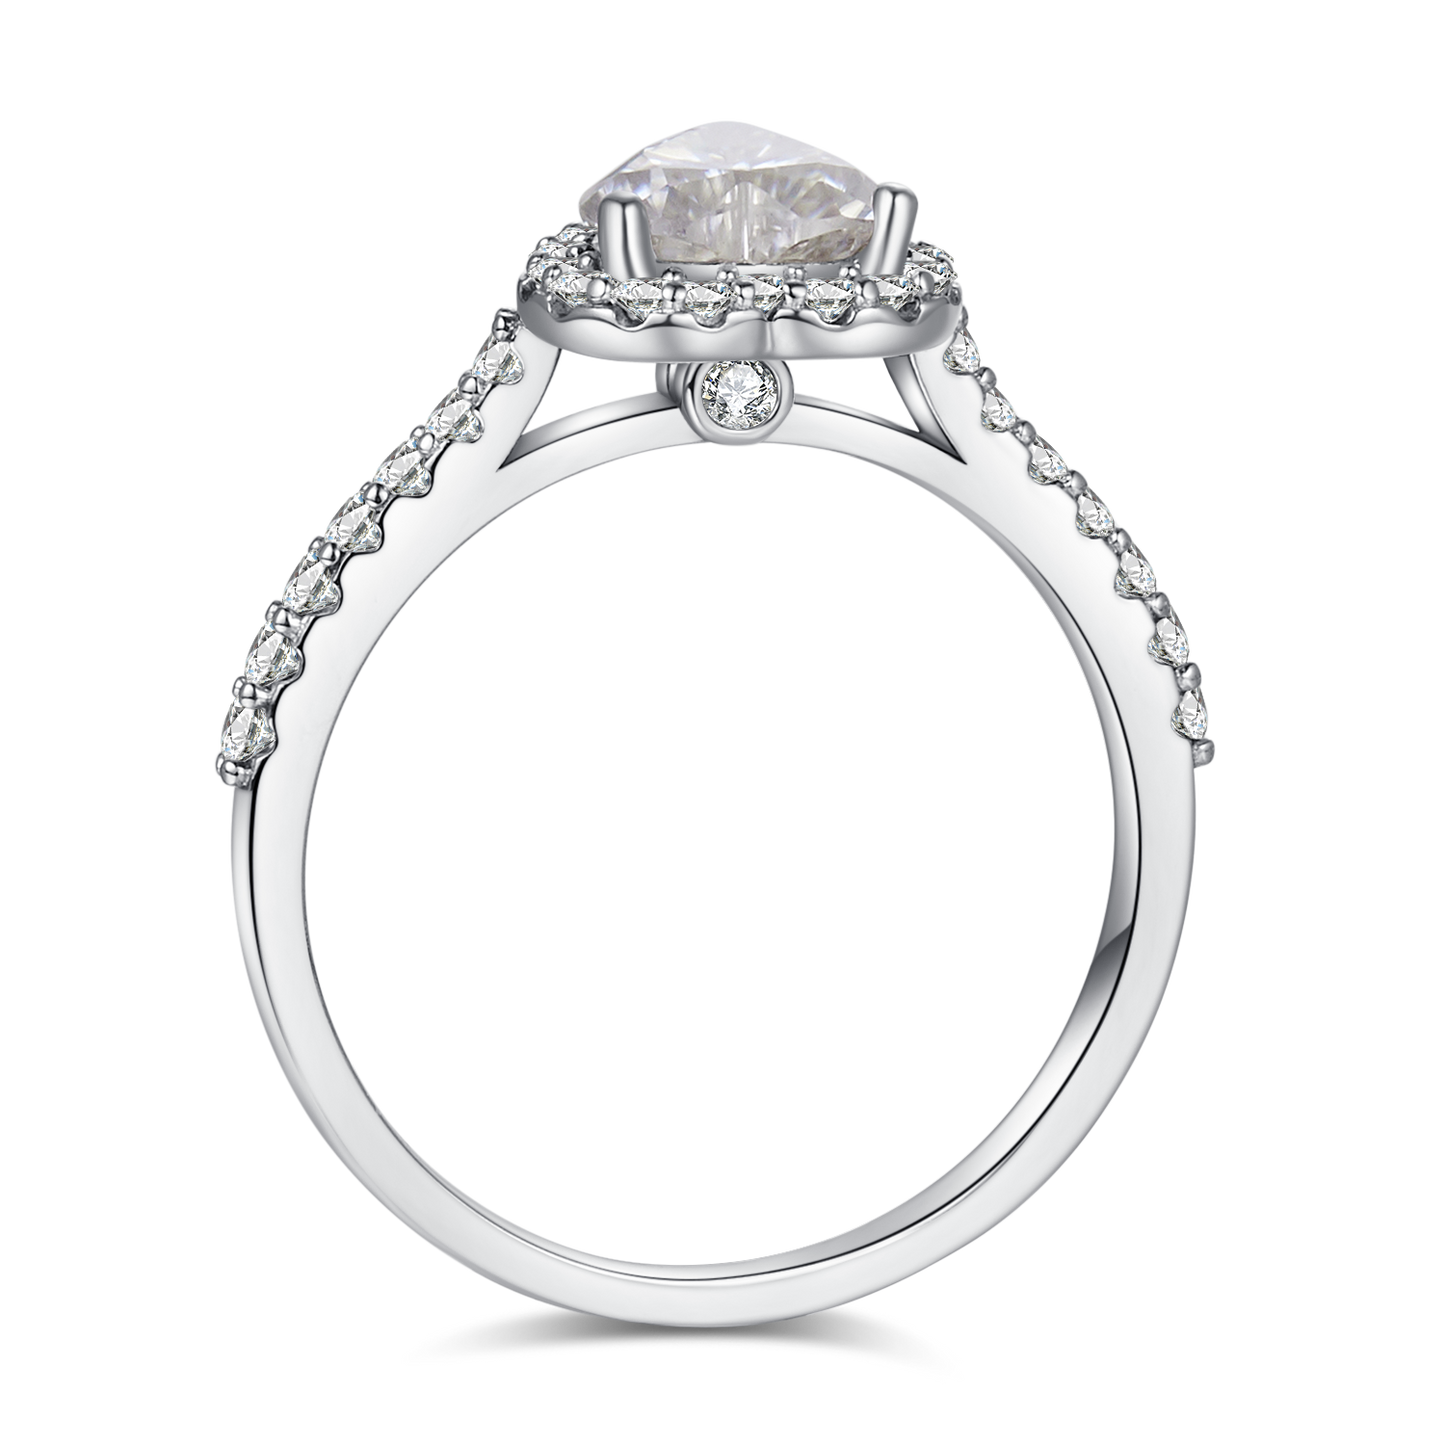 A silver trillion cut halo engagement ring with pave band.